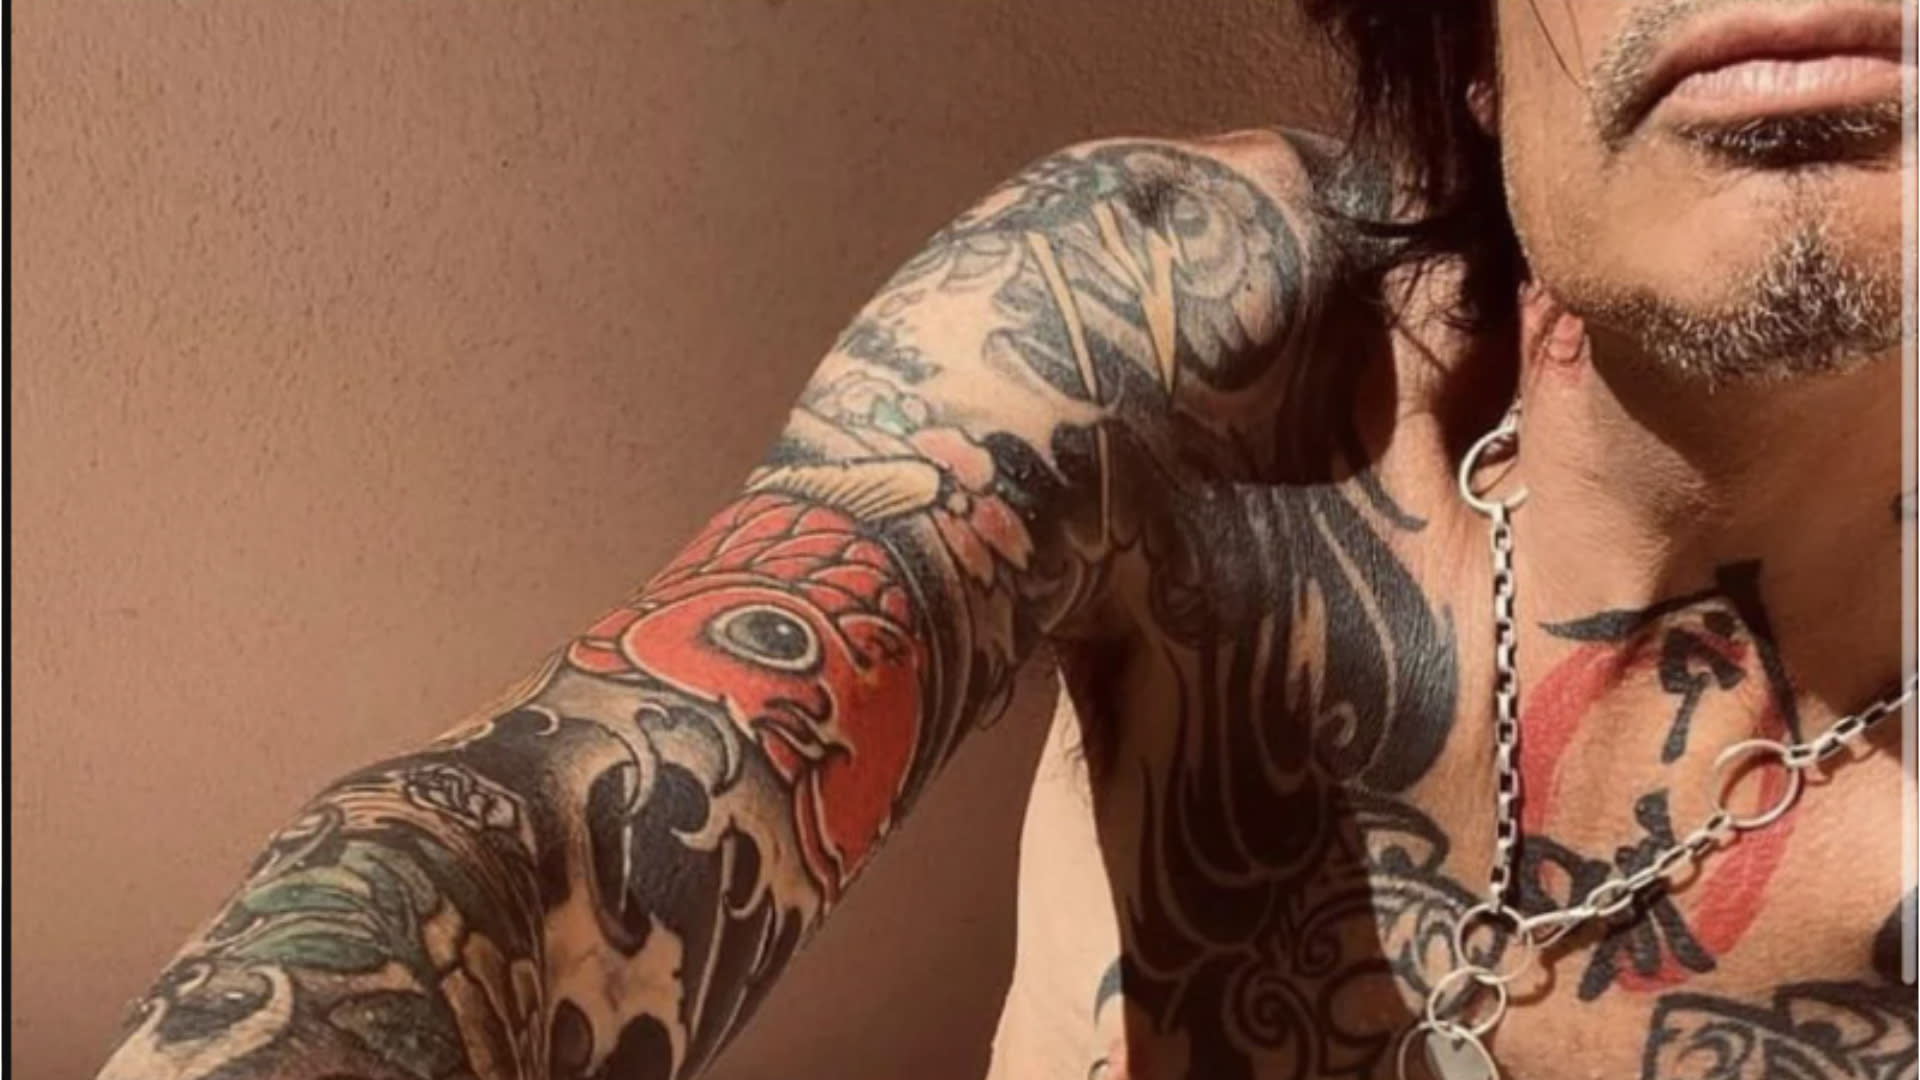 Tommy Lee Goes Full Frontal in NSFW Nude Photo